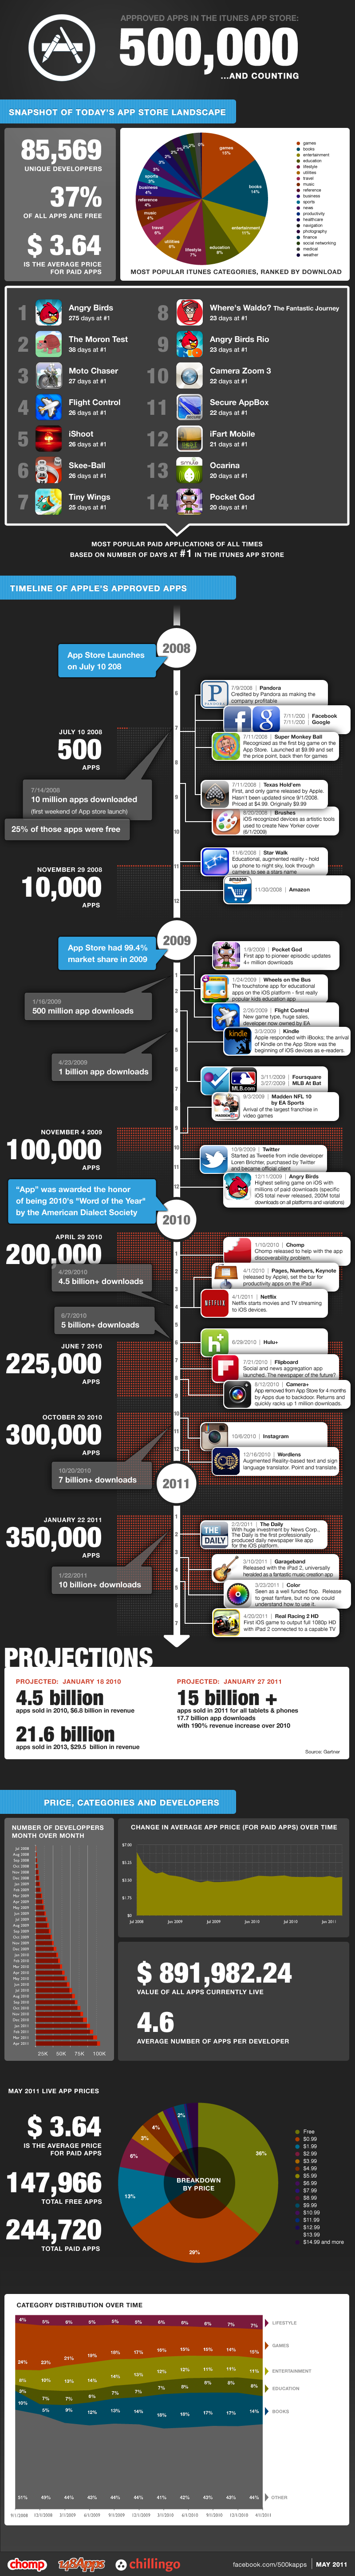 Apple Reaches 500,000 iOS Apps? [InfoGraphic]